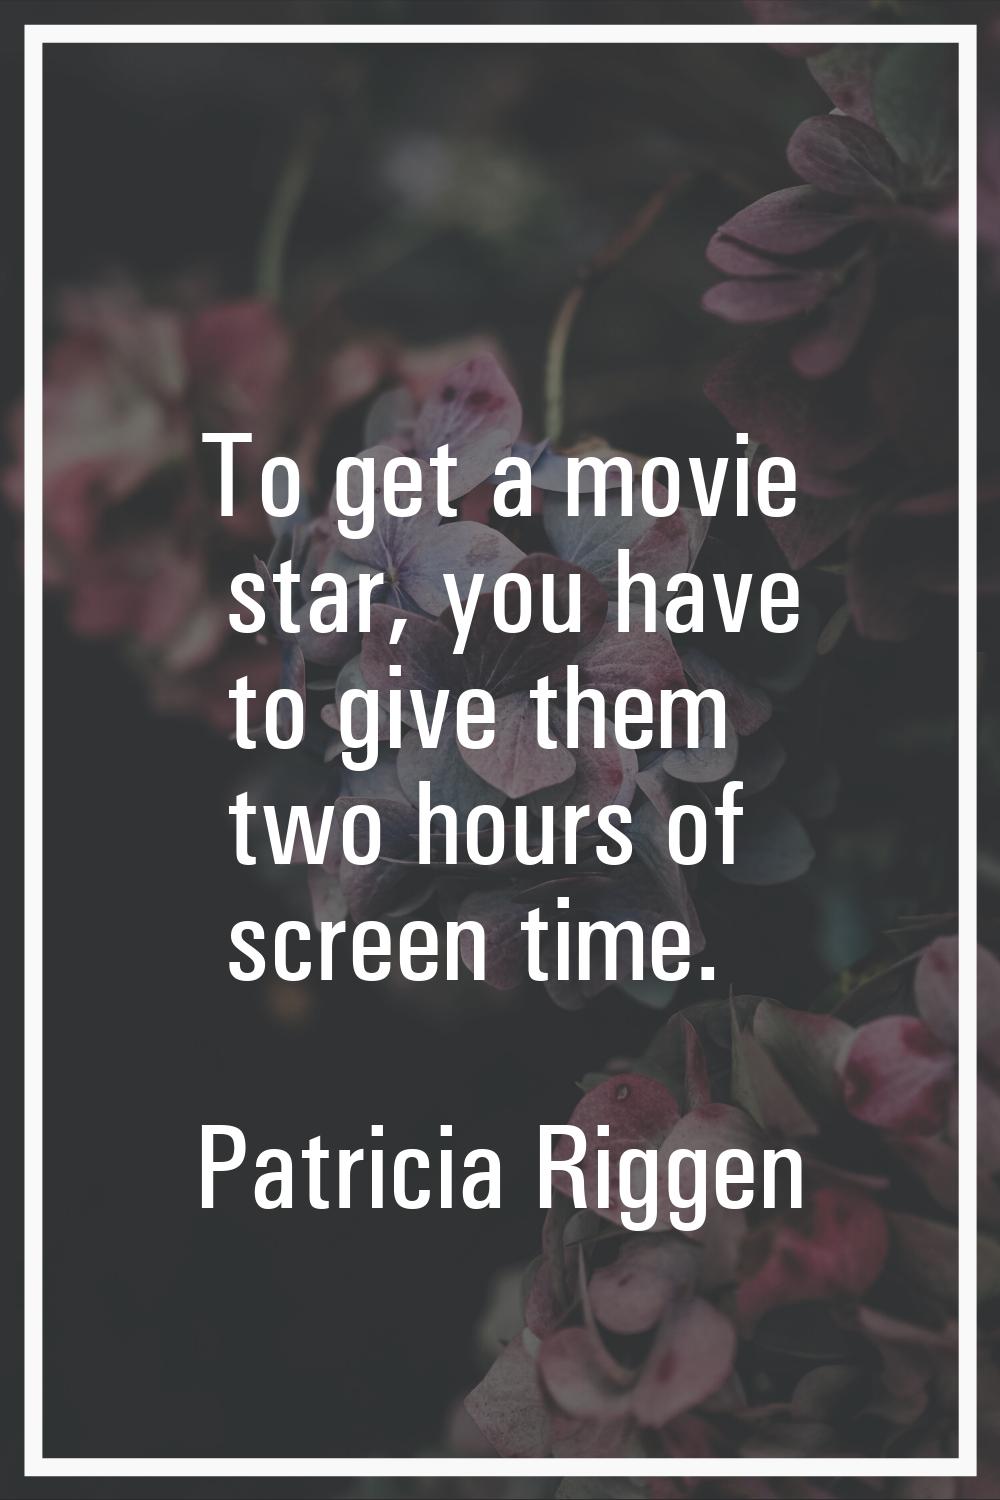 To get a movie star, you have to give them two hours of screen time.